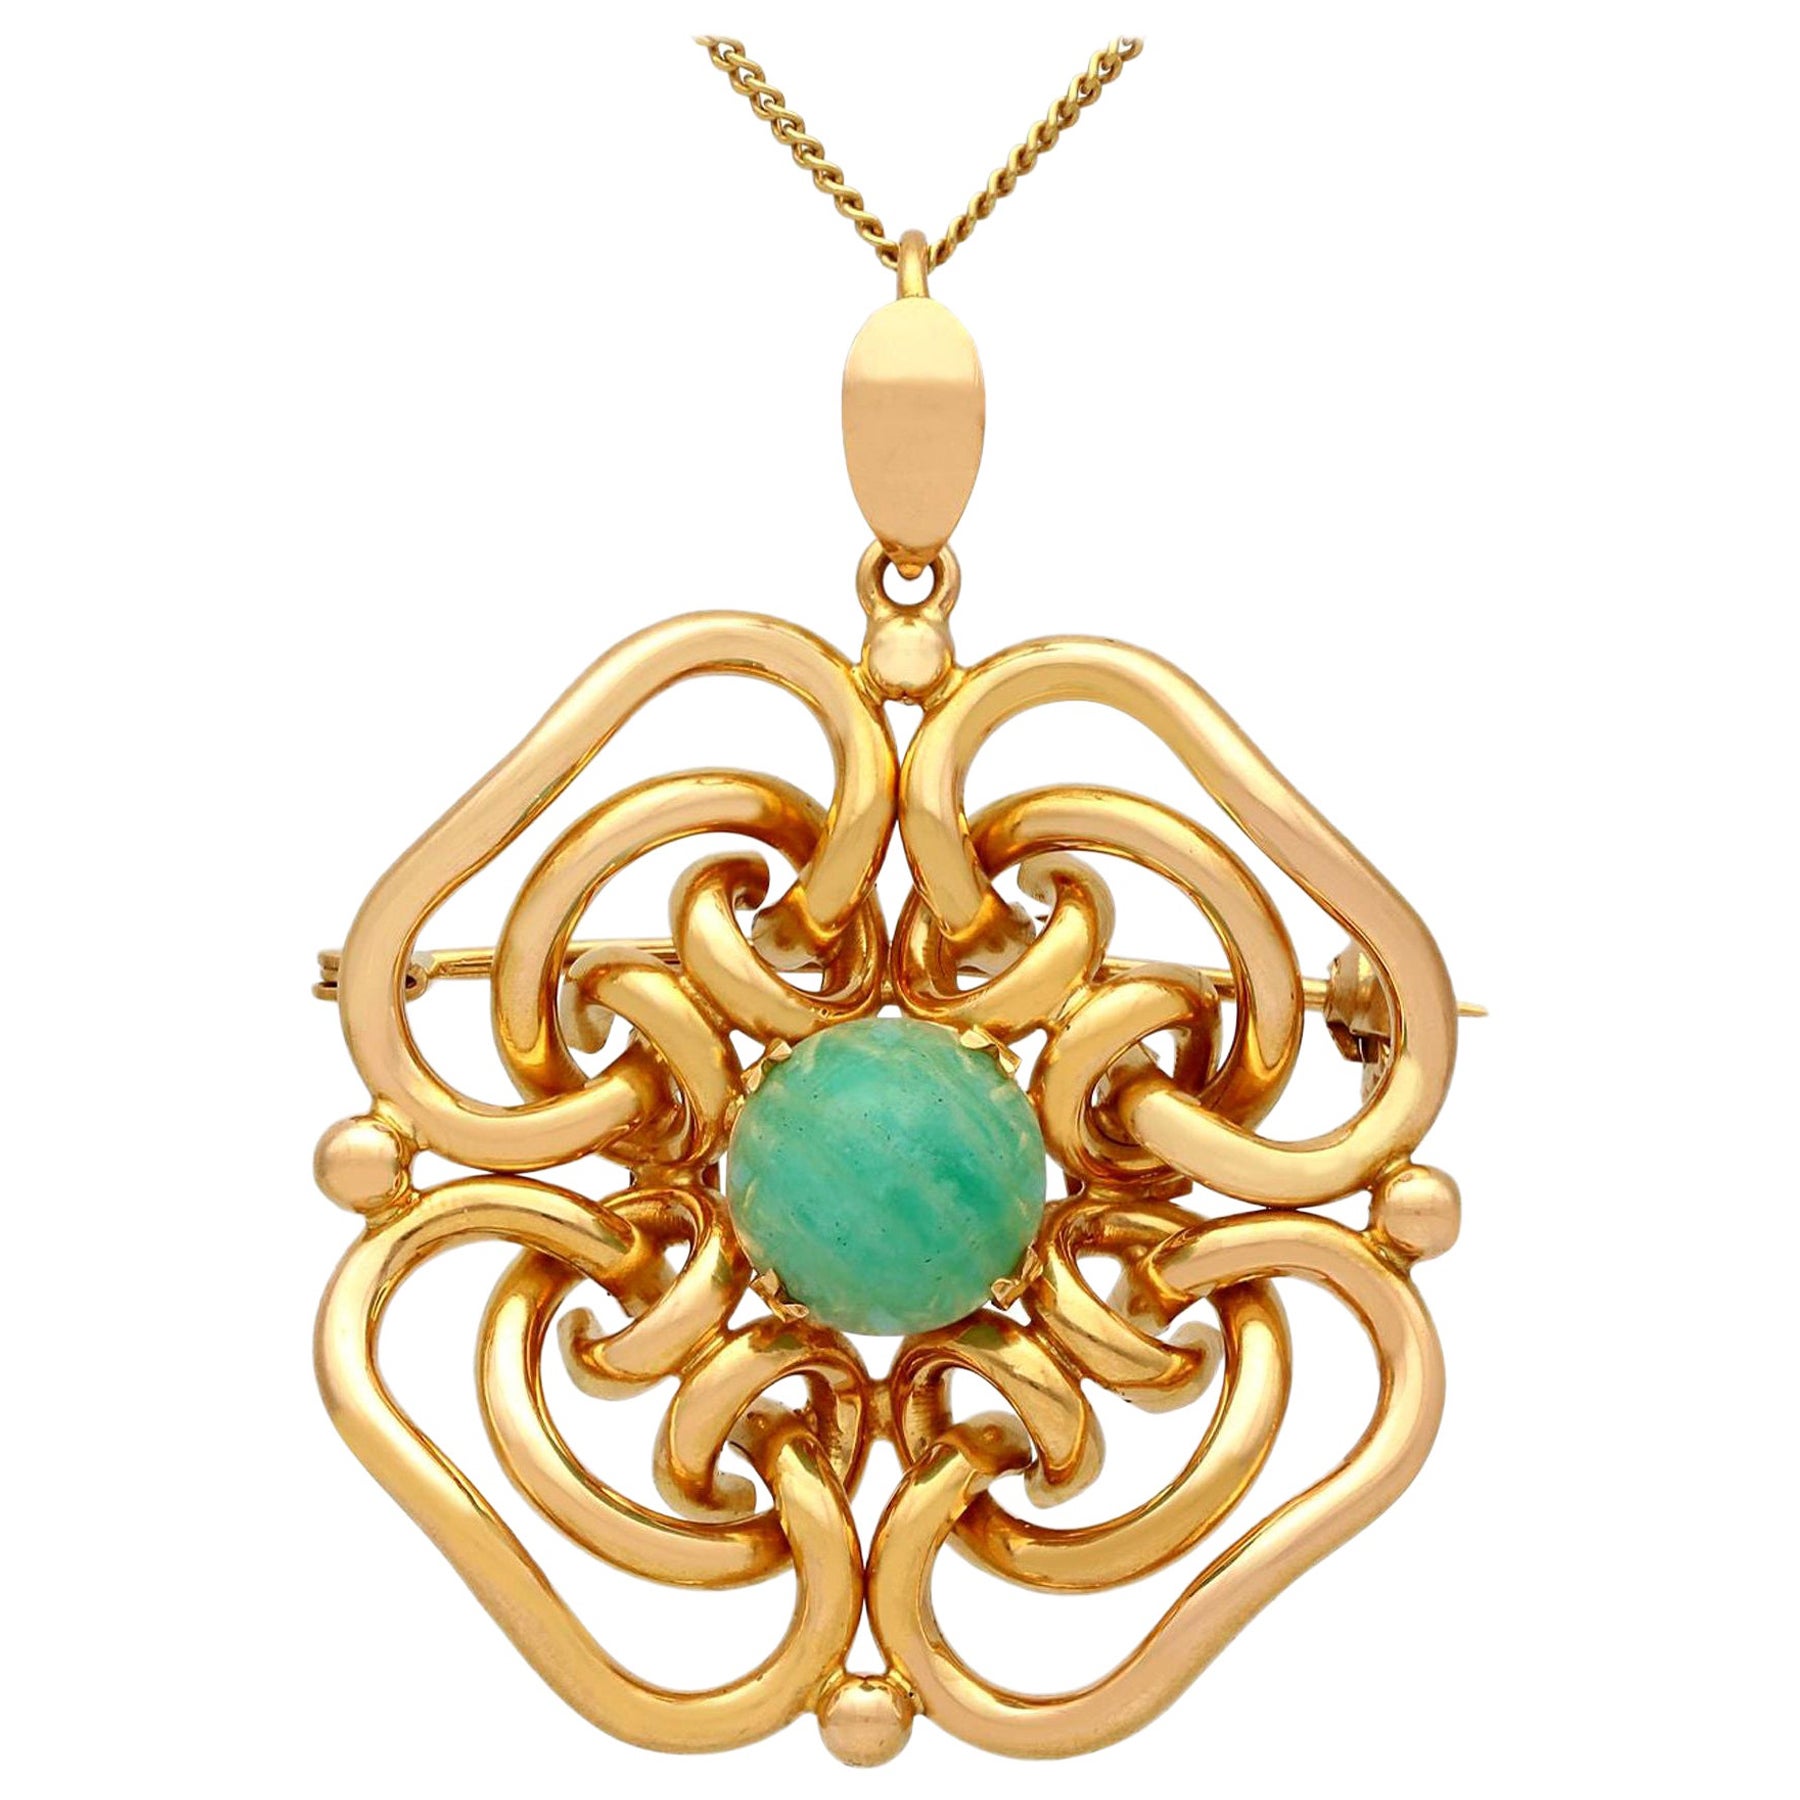 2.83 Carat Cabochon Cut Chalcedony and Yellow Gold Pendant For Sale